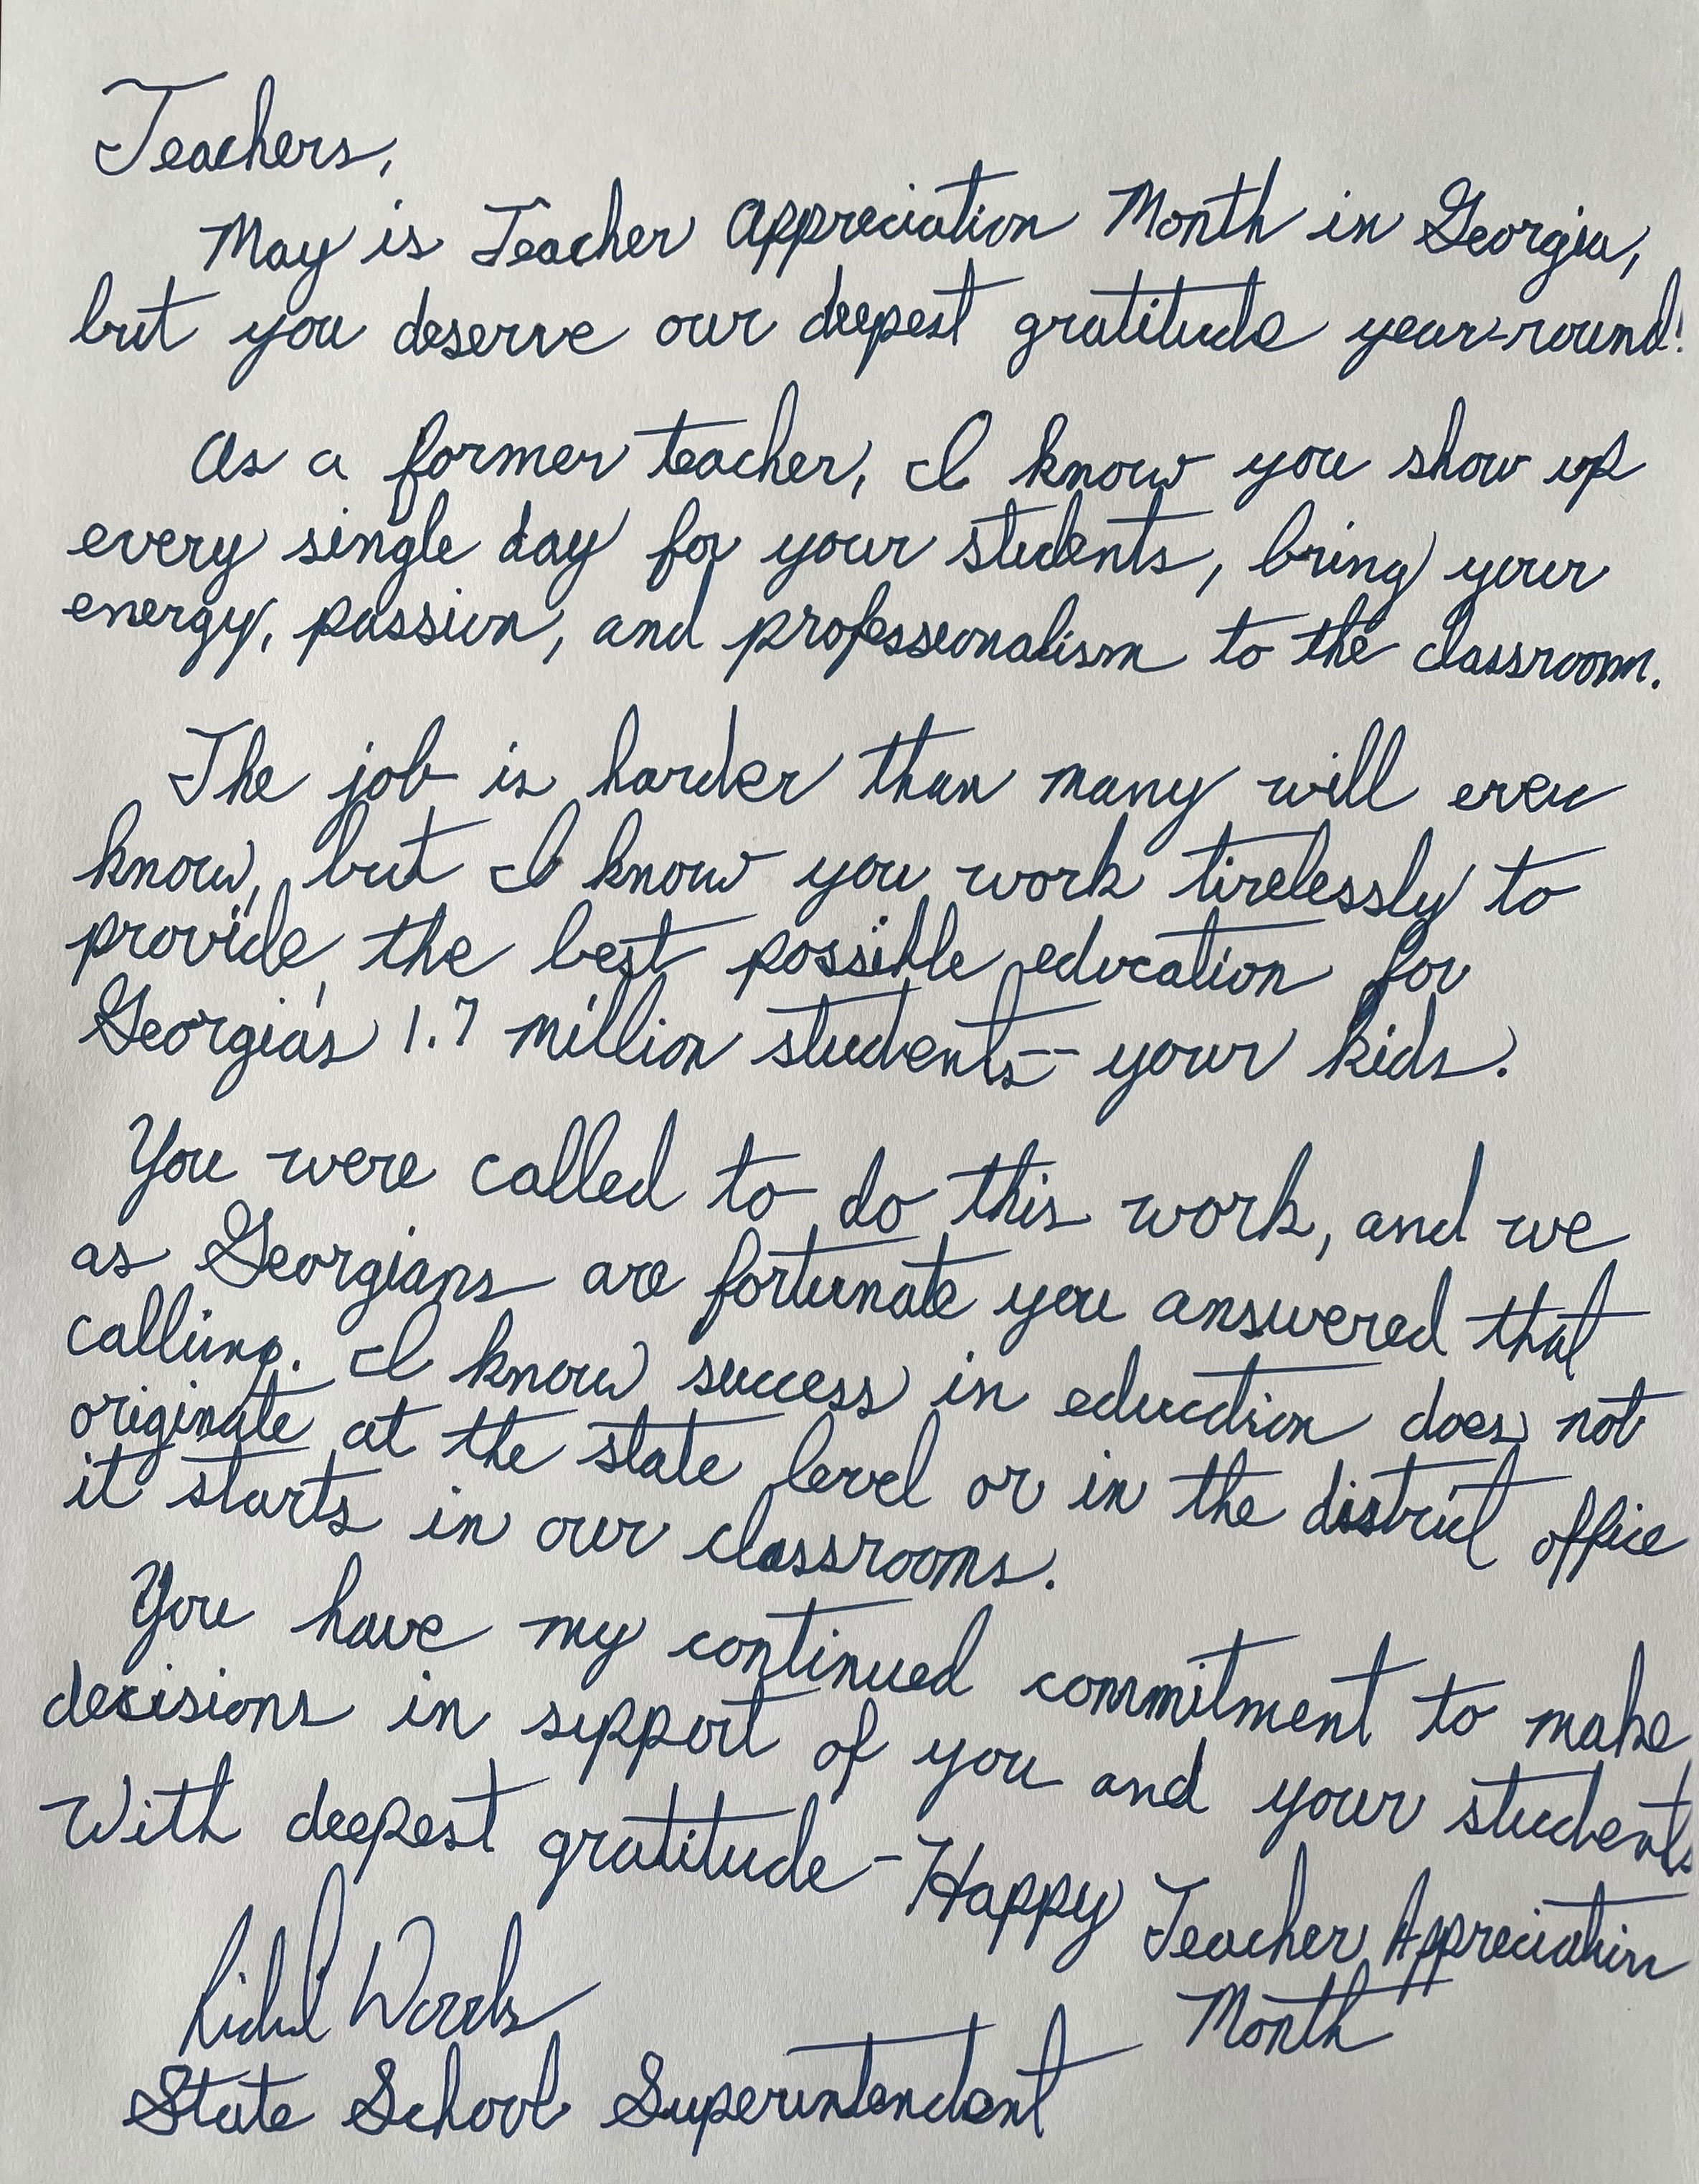 A handwritten letter from State Superintendent Richard Woods to the teachers of Georgia, in recognition of Teacher Appreciation Month